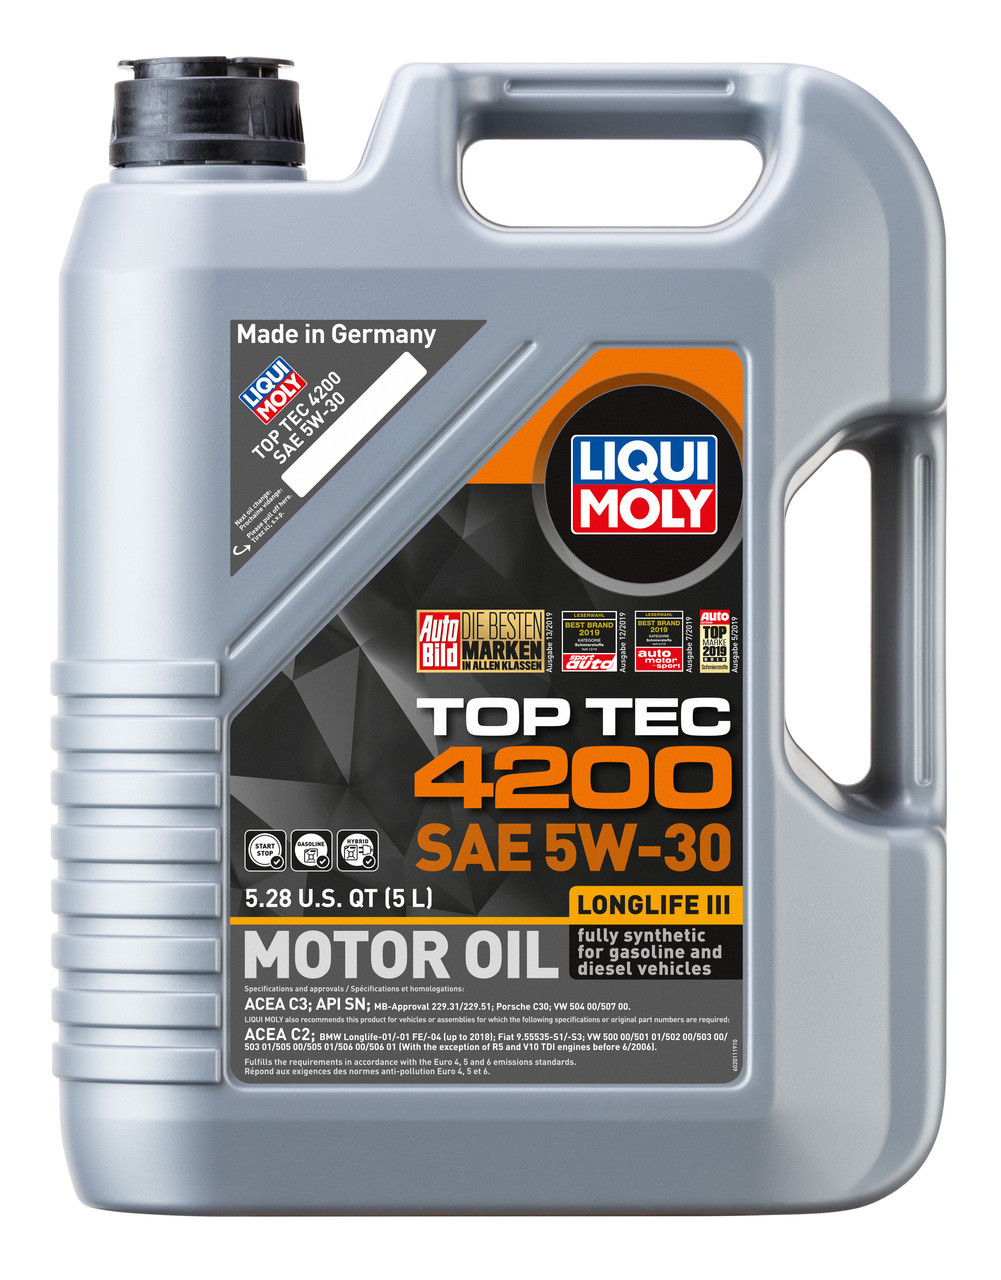 Liqui Moly LIQUI-MOLY TOP TEC 4200 5W-30 5 LITRES + PUROLATOR OIL FILTER  FOR TOYOTA CAMRY , HIGHLANDER , SIENNA , VENZA , AVALON , RX 350 , 330 , ES  350 , 330, GS 350 FROM YEAR 2000 - 2007